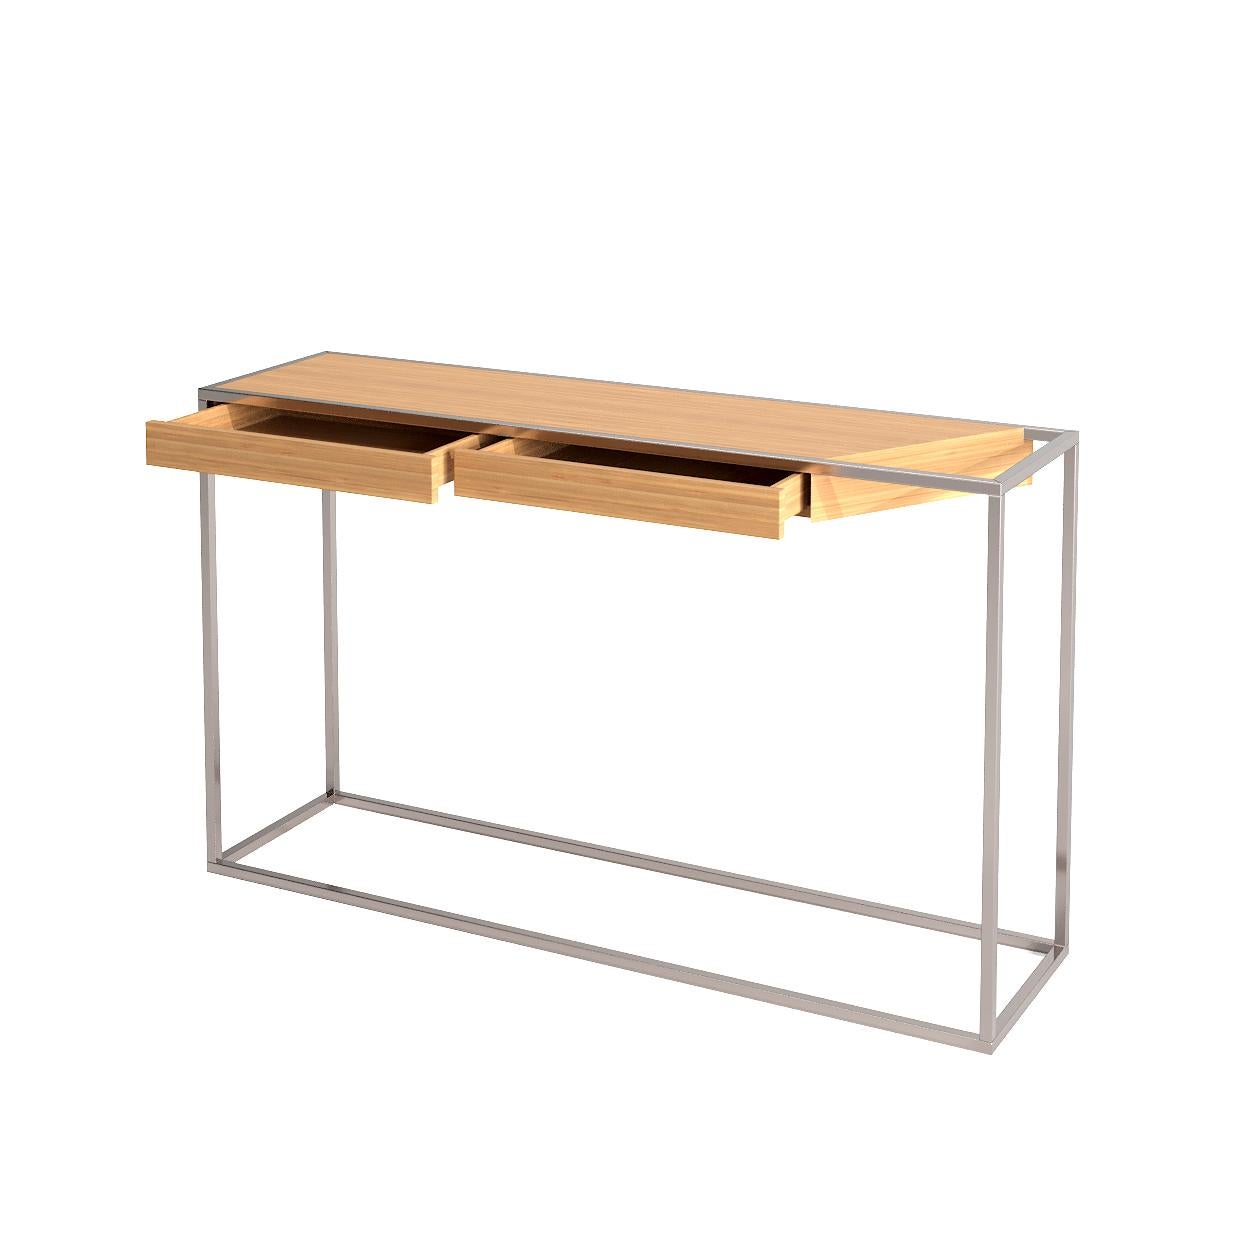 Modern Minimalist Rectangular Console Table Oak Wood and Brushed Stainless Steel In New Condition For Sale In Vila Nova Famalicão, PT